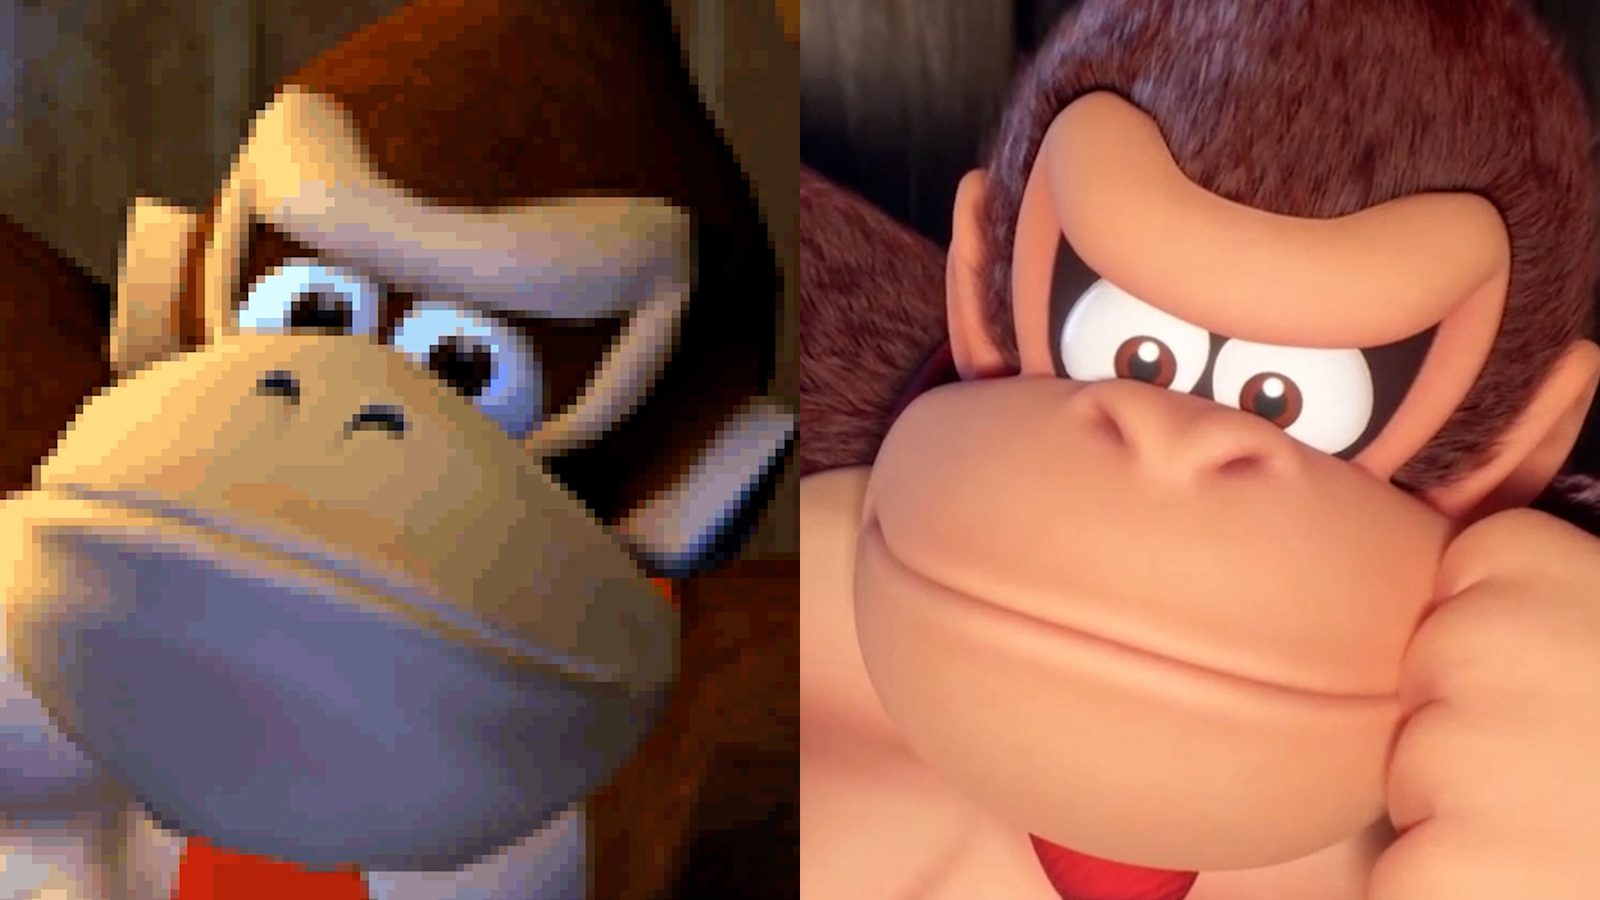 Mario vs. Donkey Kong Remake Announced for Switch